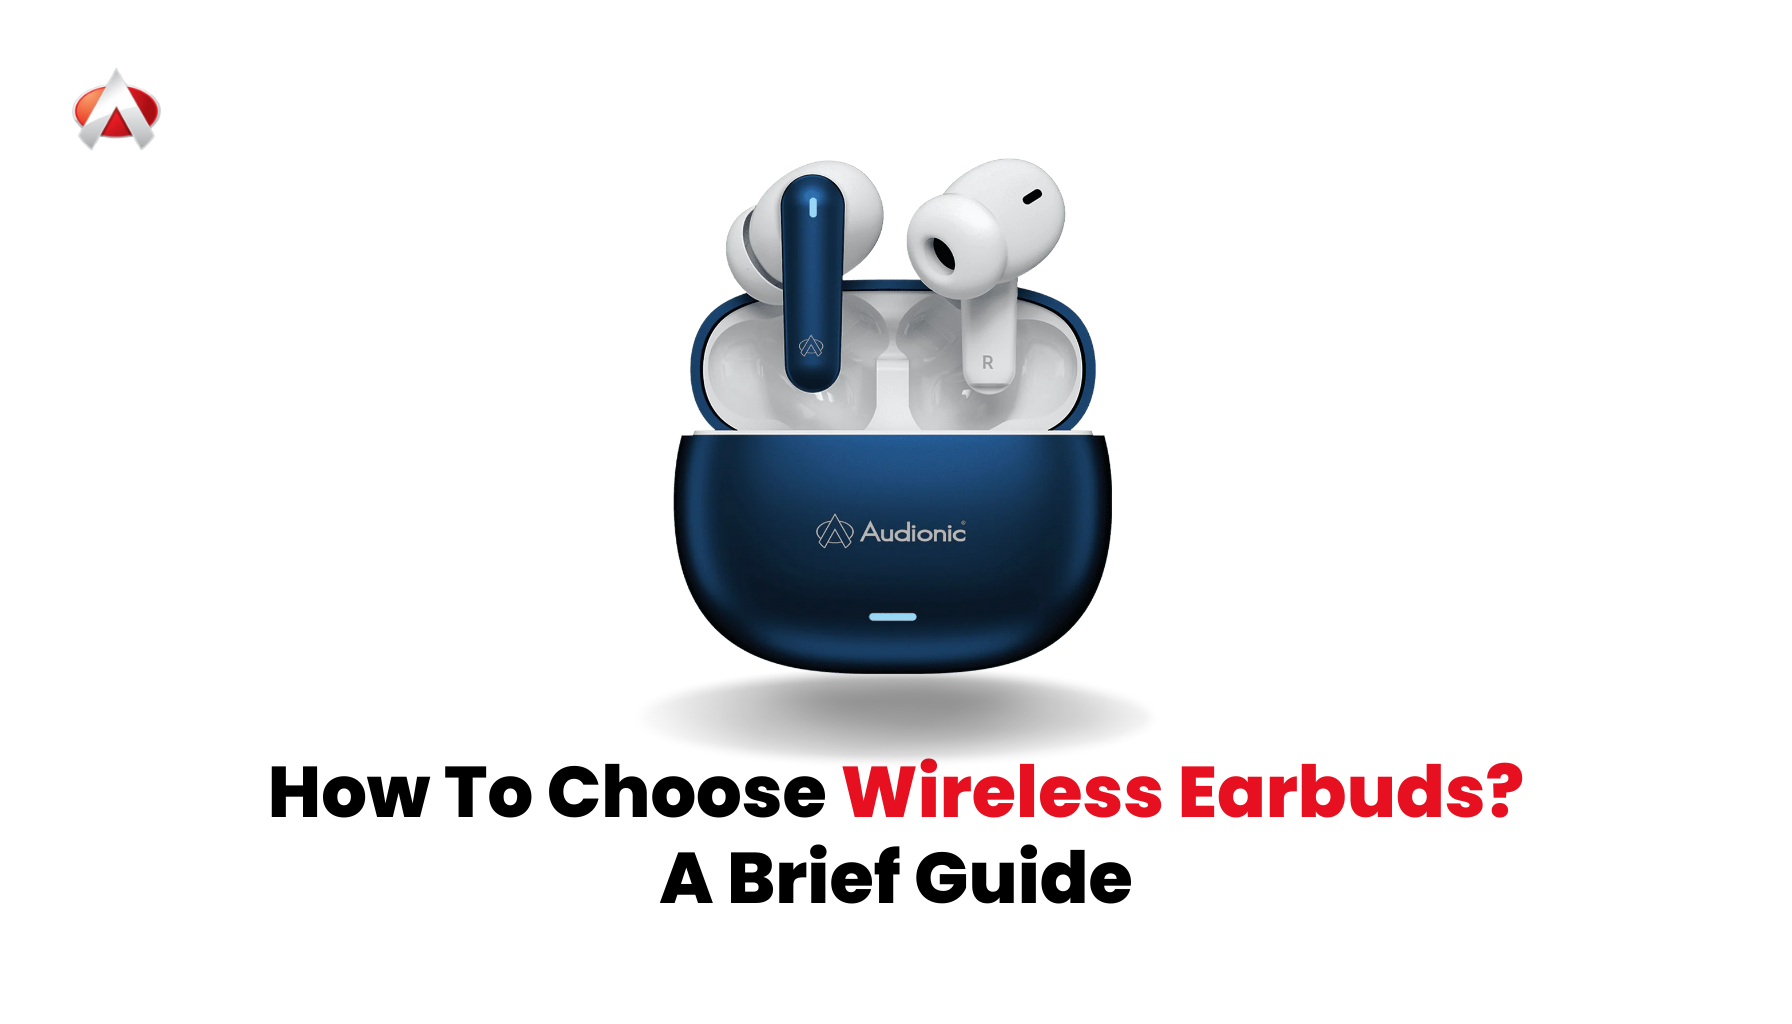 How To Choose Wireless Earbuds? A Brief Guide